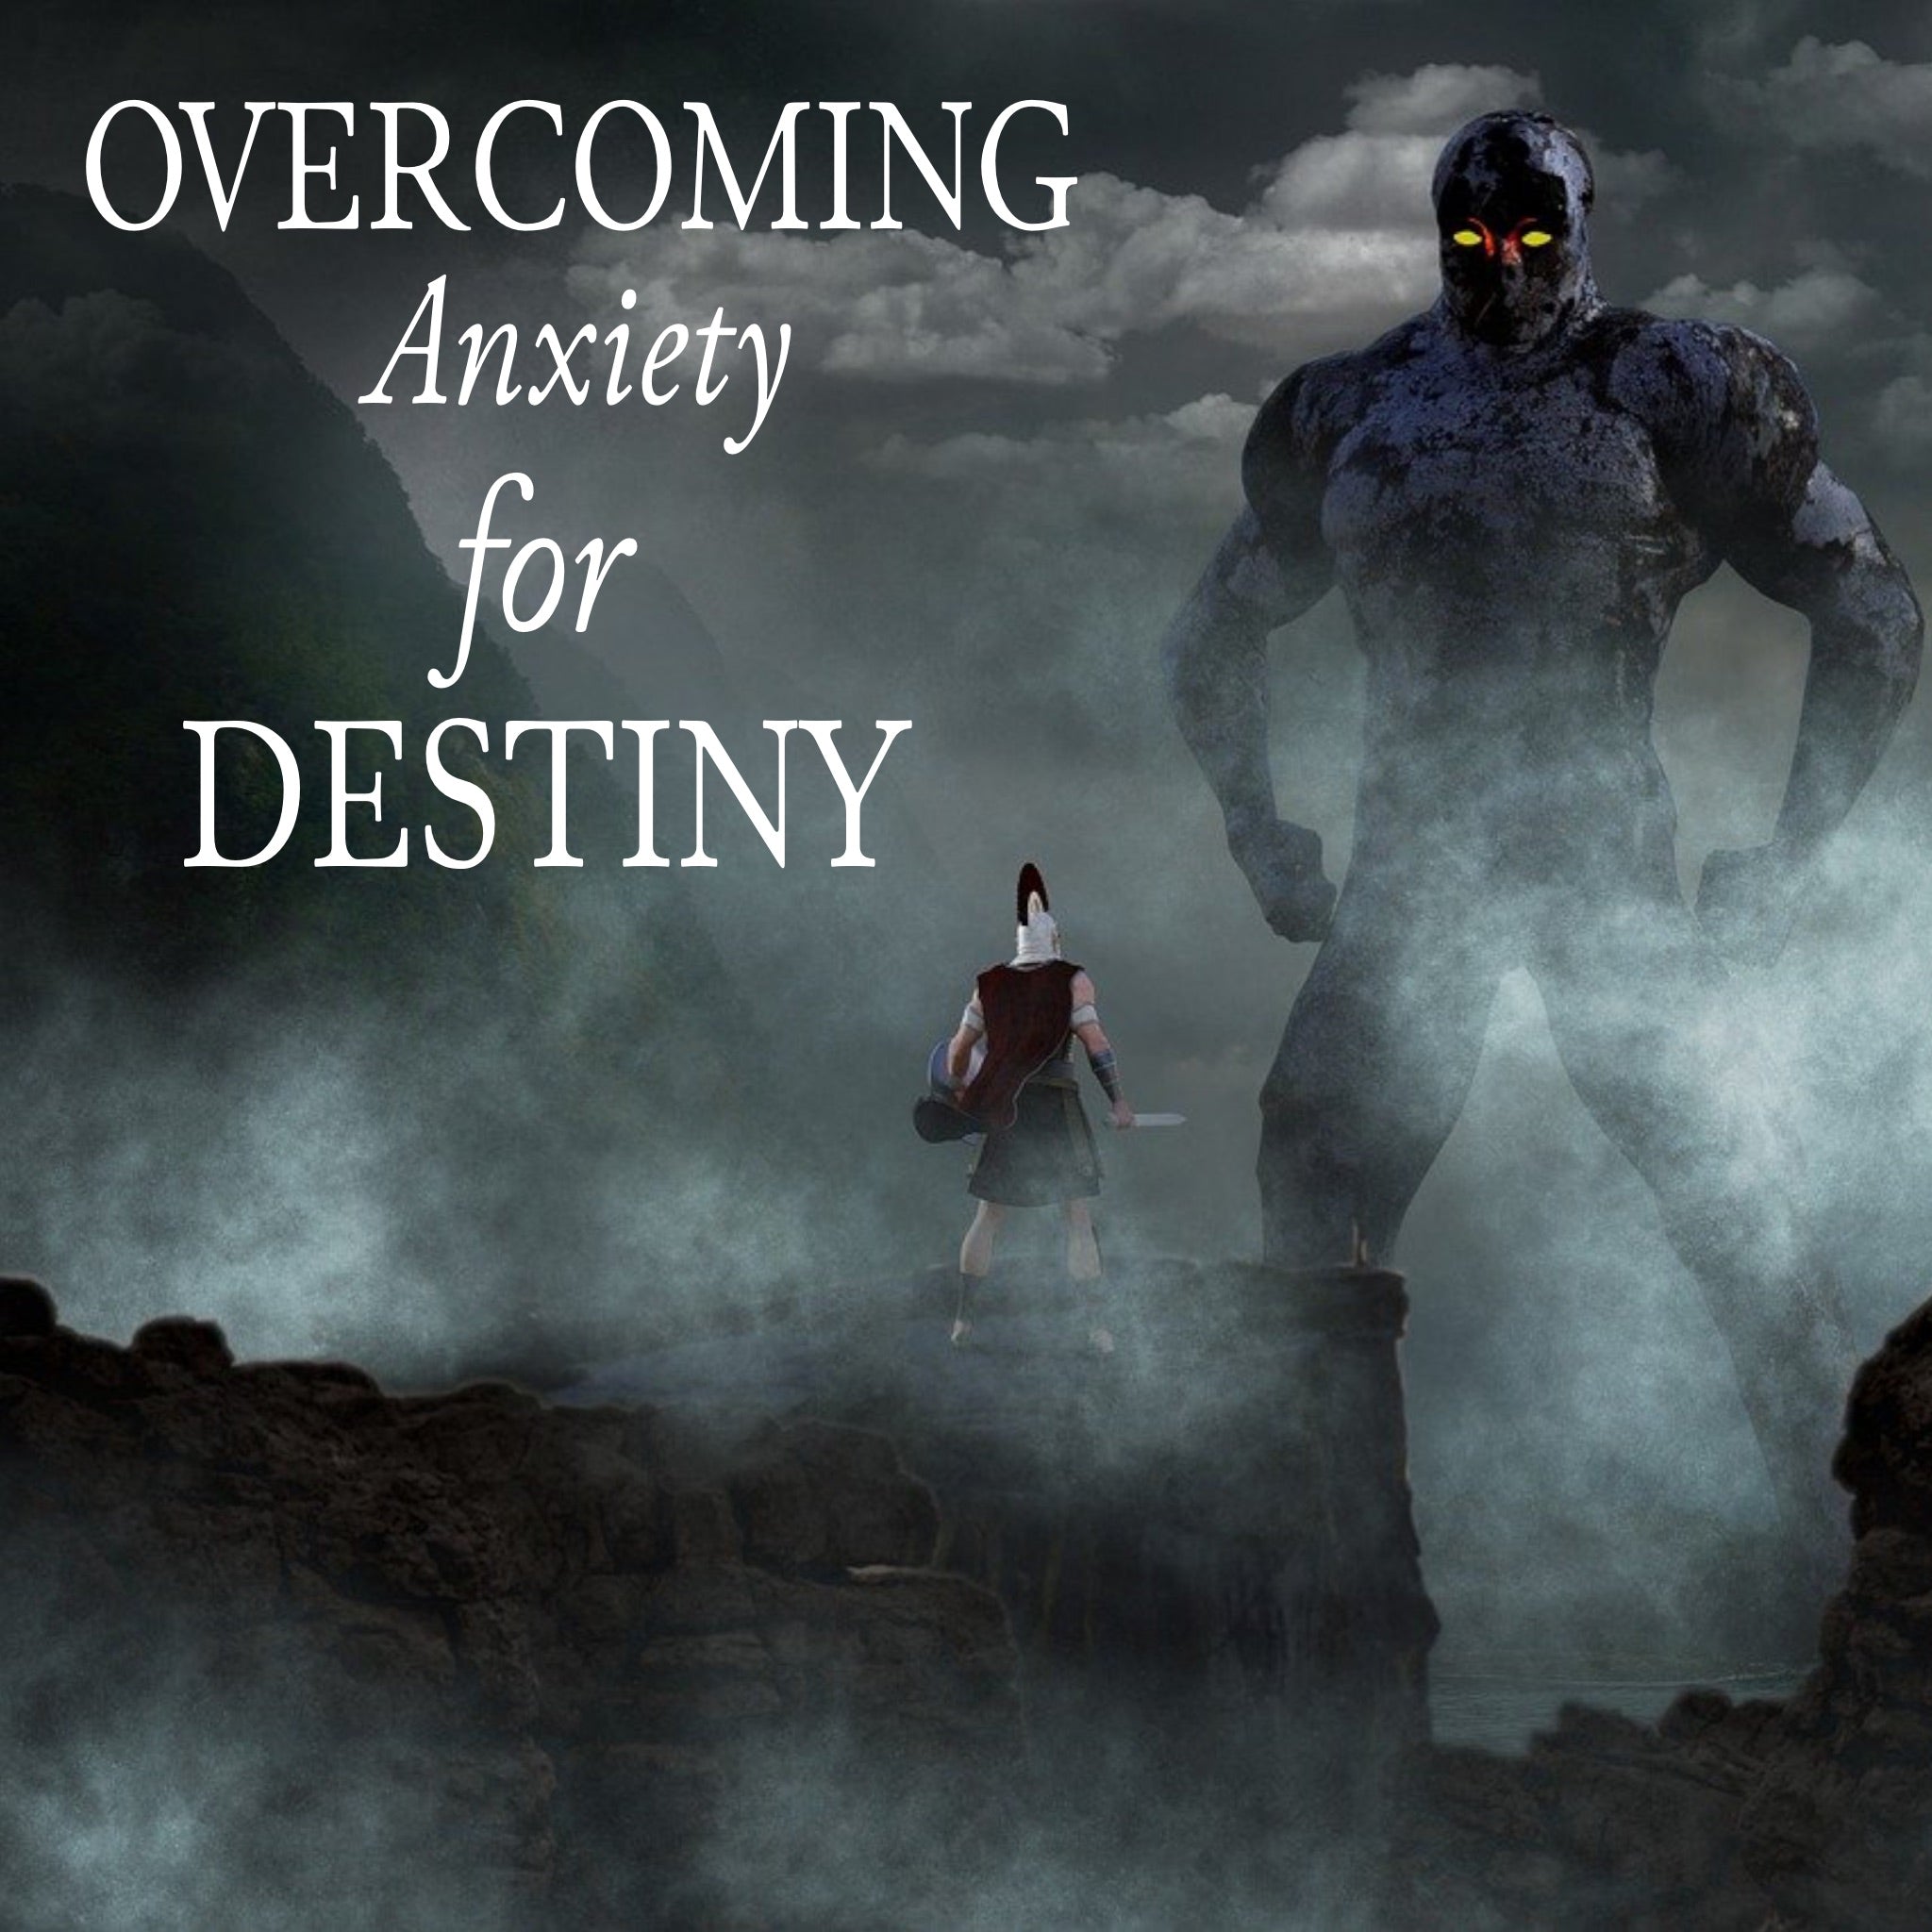 Overcoming Anxiety for Destiny - 1/9/22